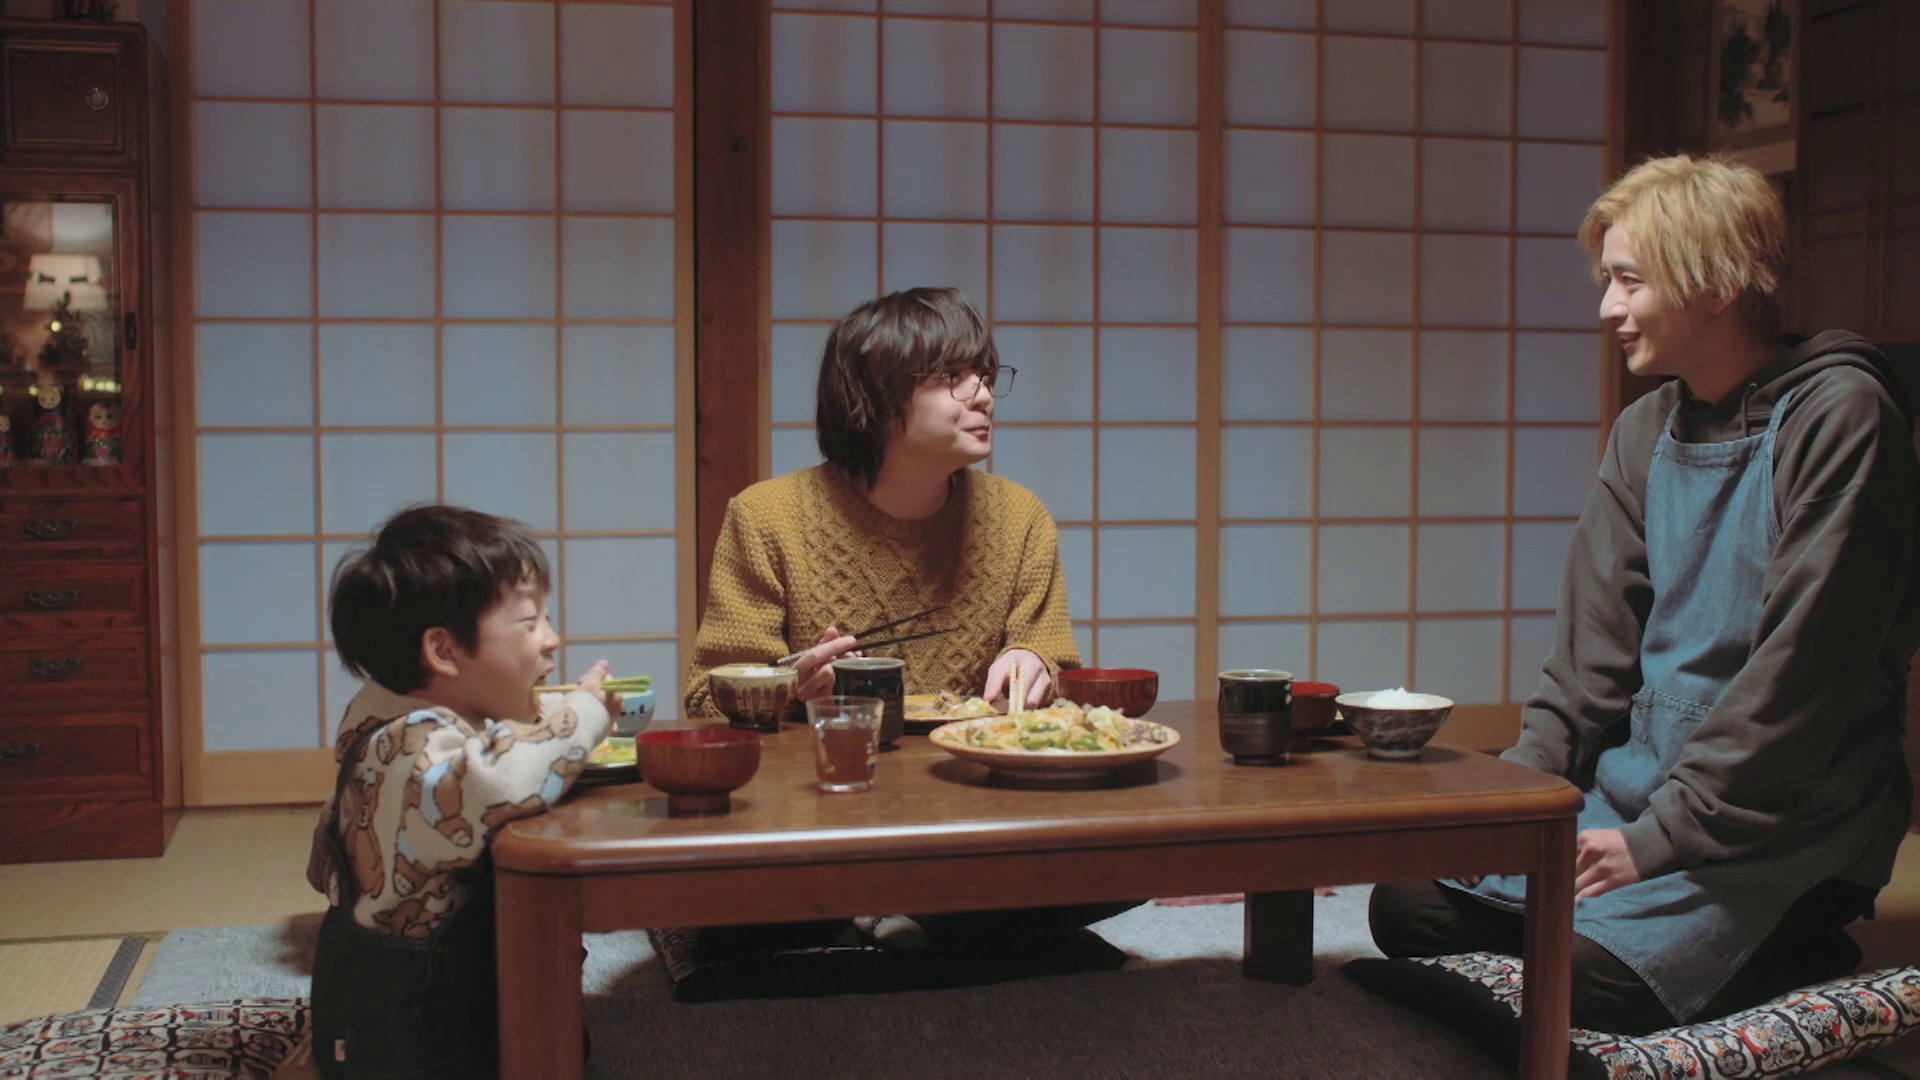 Our Dining Table  – Episode 6 – Recap and Review